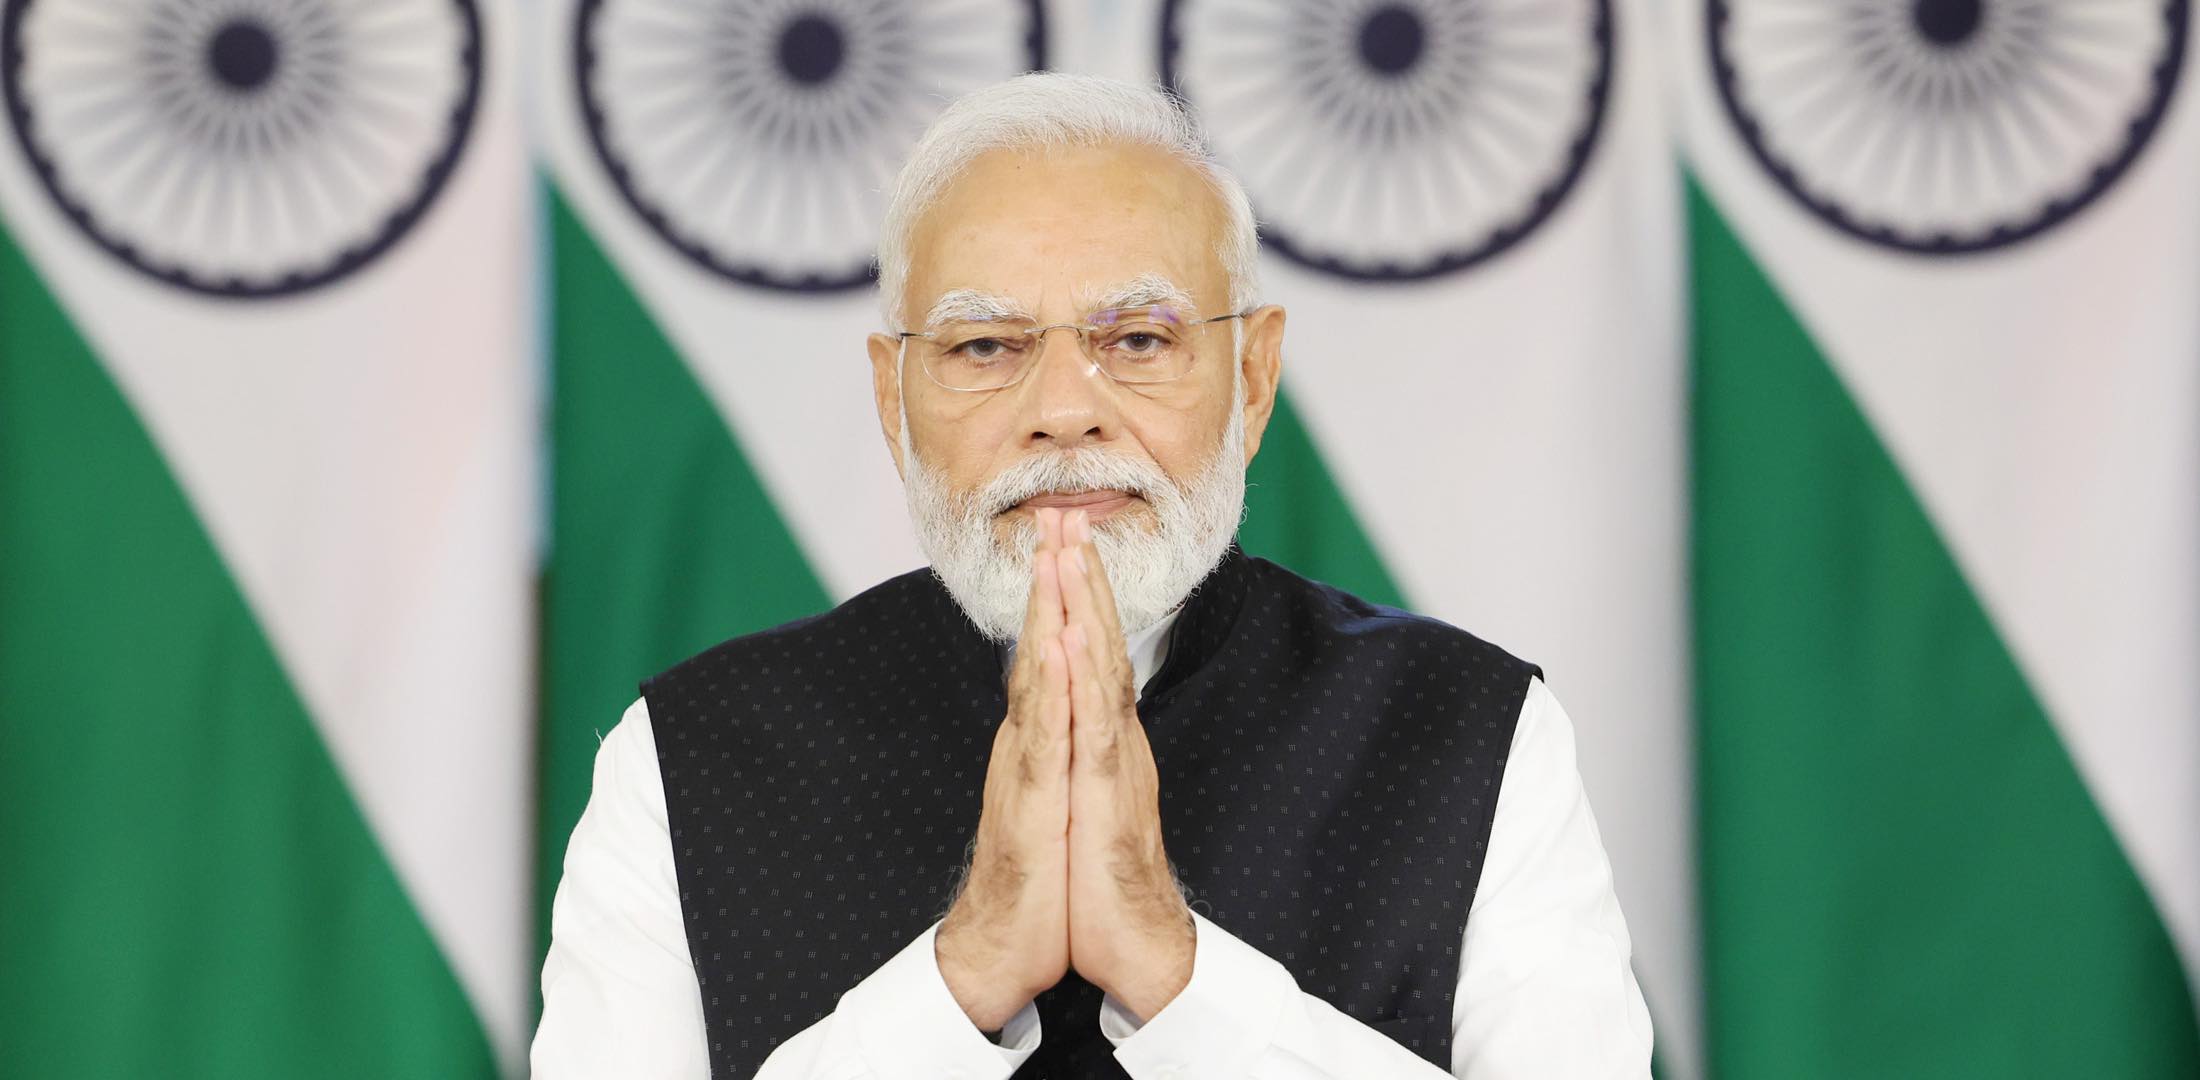 Modi's 'Har Ghar Jal' reaps health and economic benefits: WHO report